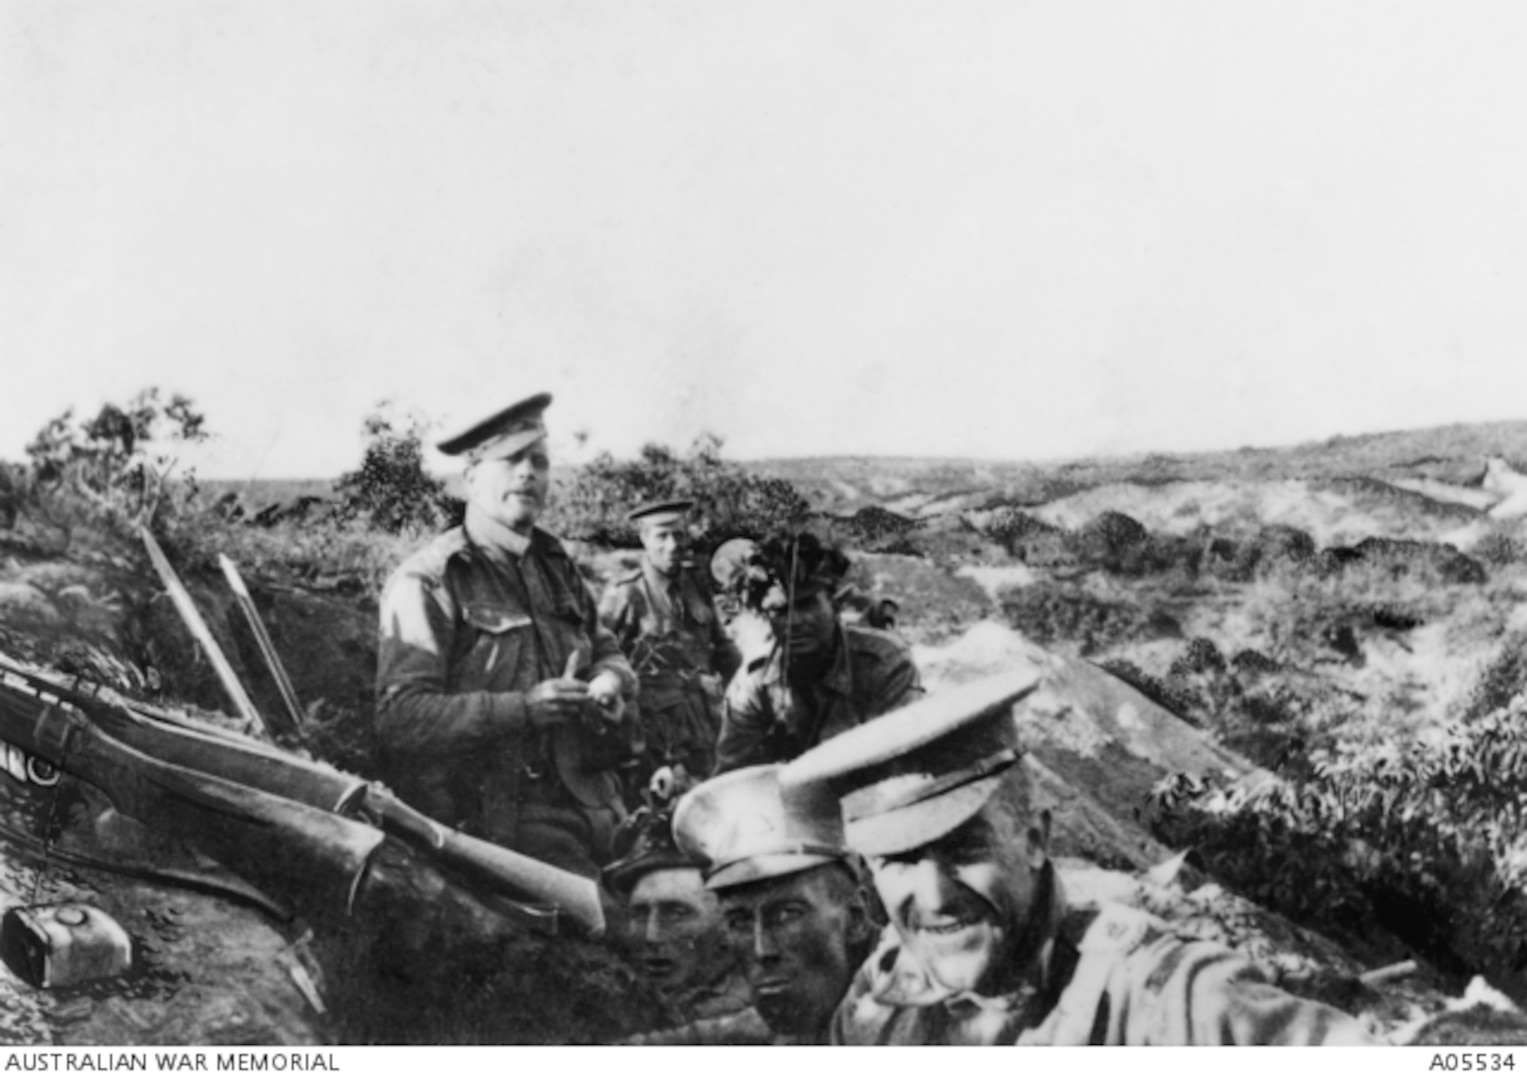 File photo of 100th Anniversary of ANZAC Day